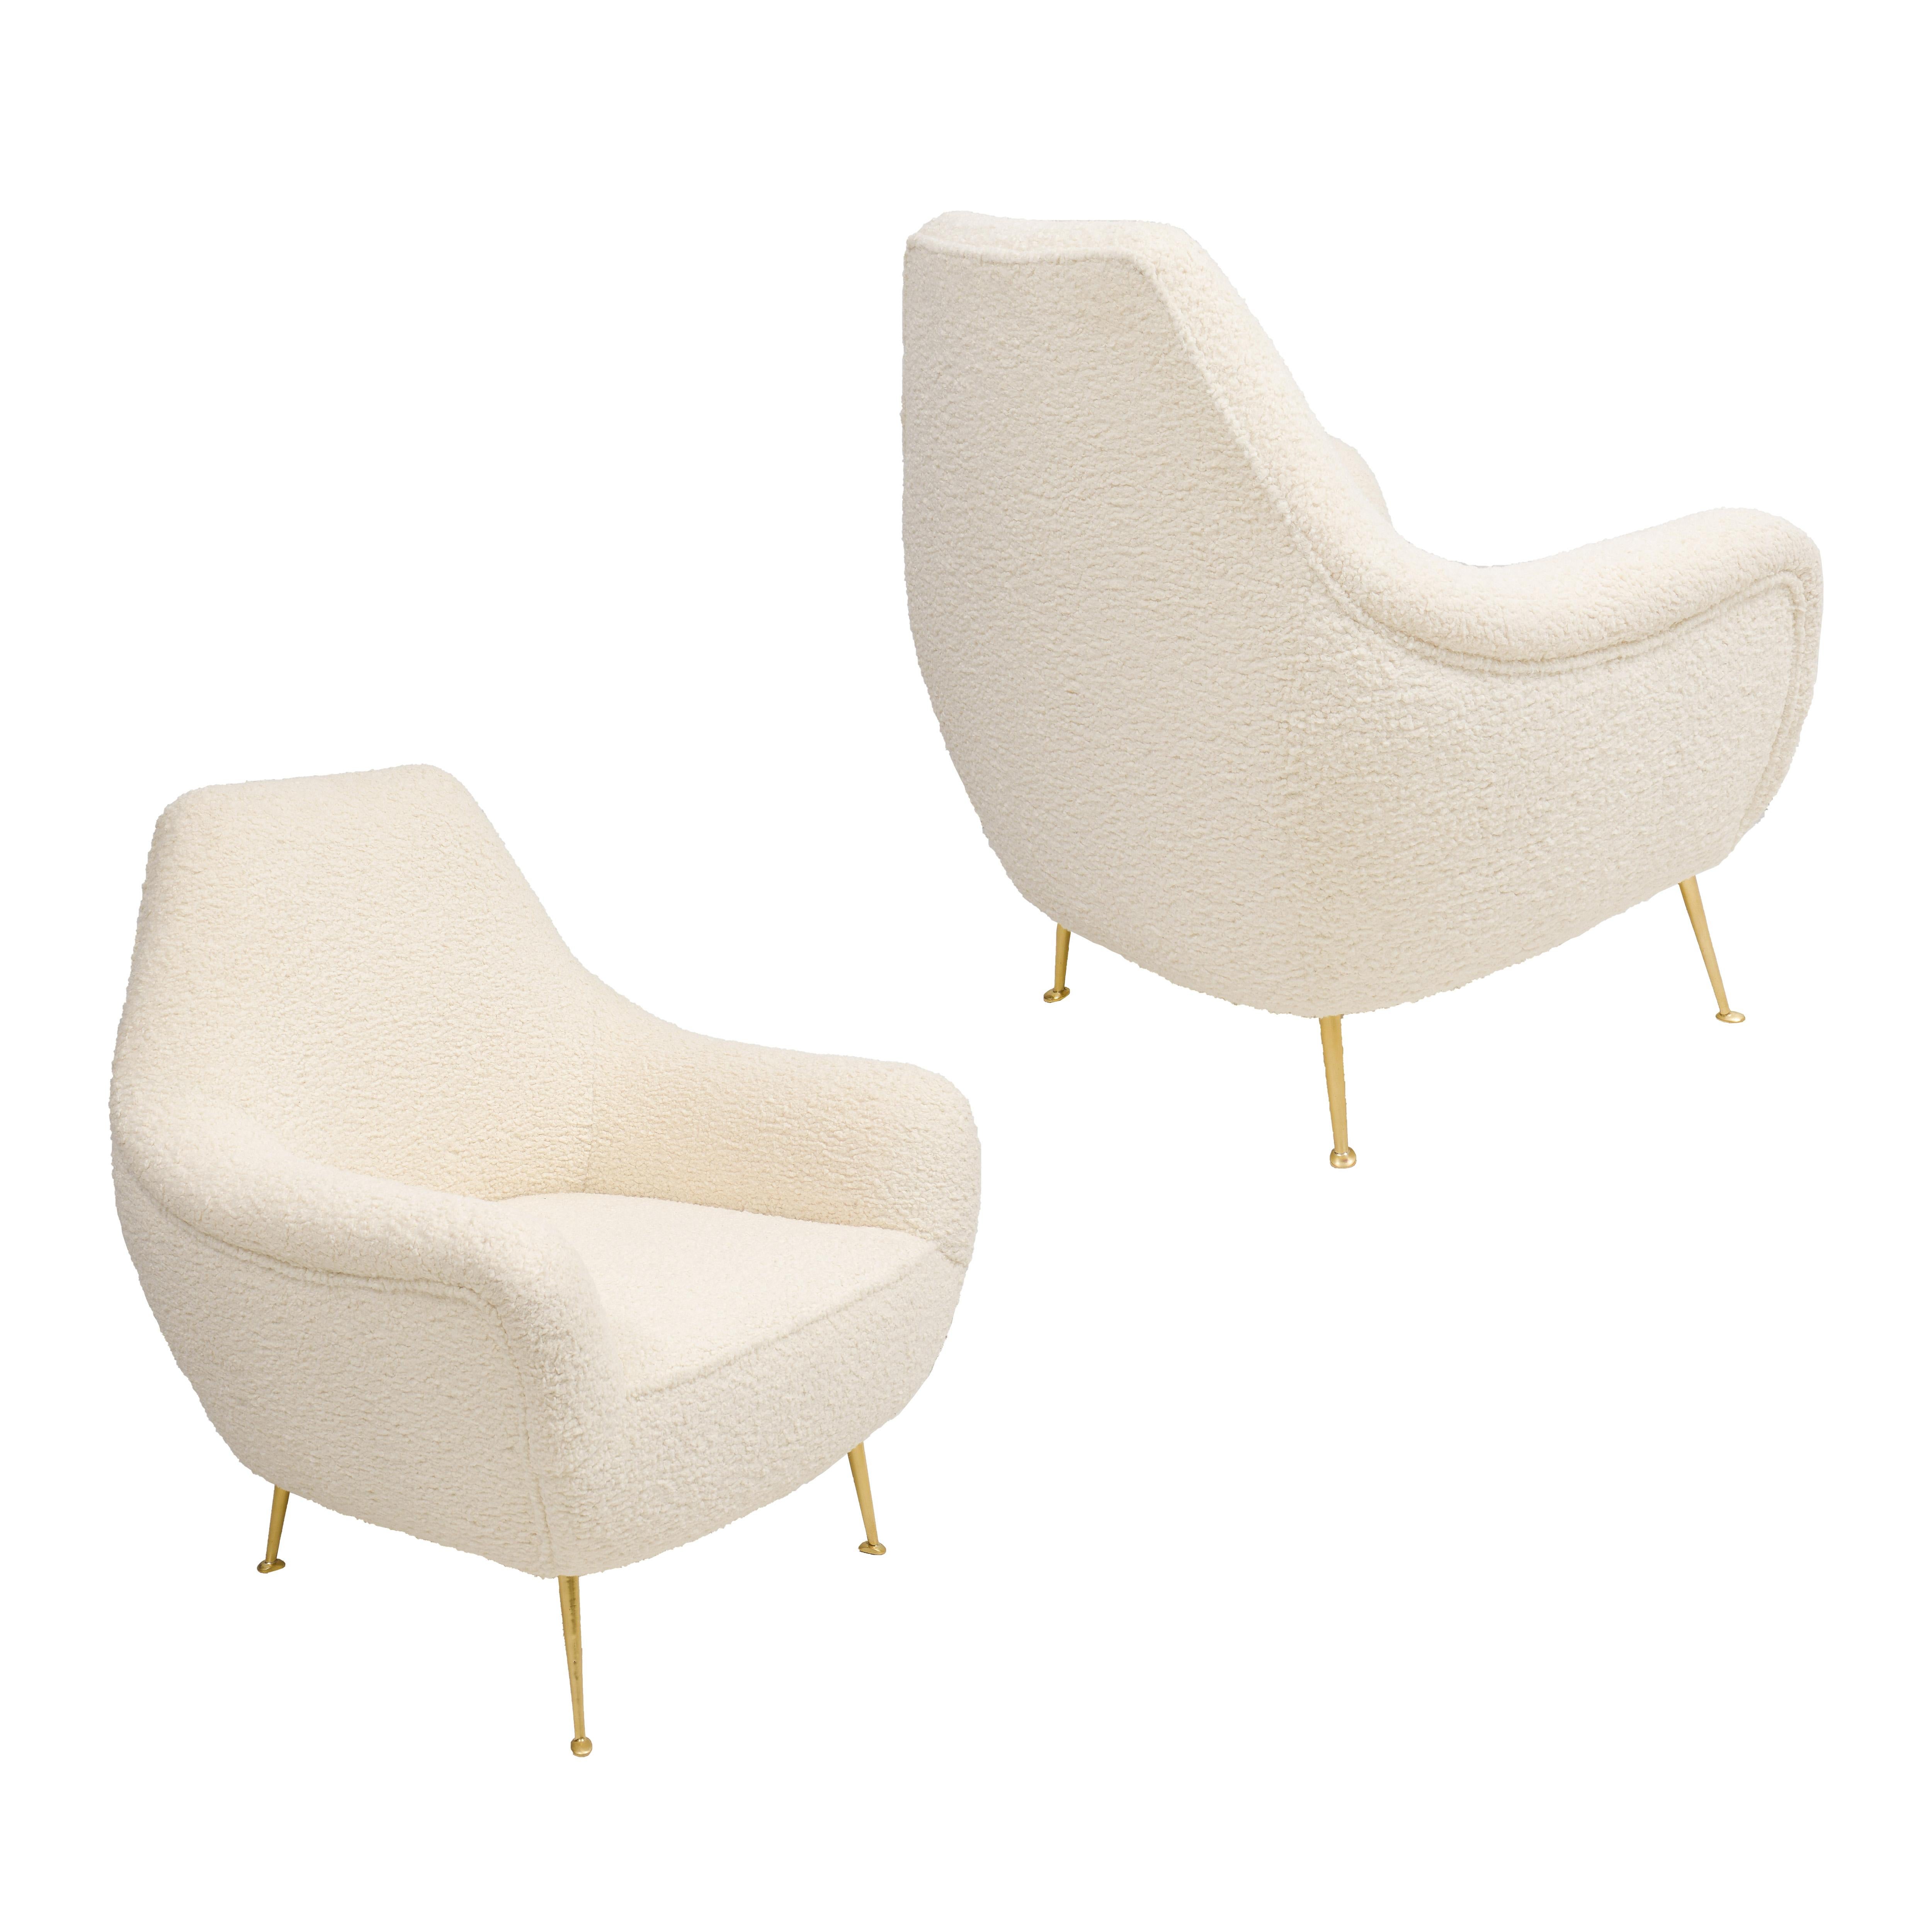 Custom pair of Italian lounge chairs in the mid-century manner upholstered in boucle. Please note the lead time for custom made is 8-10 weeks.
NOTE:  Upholstery with COM is additional.